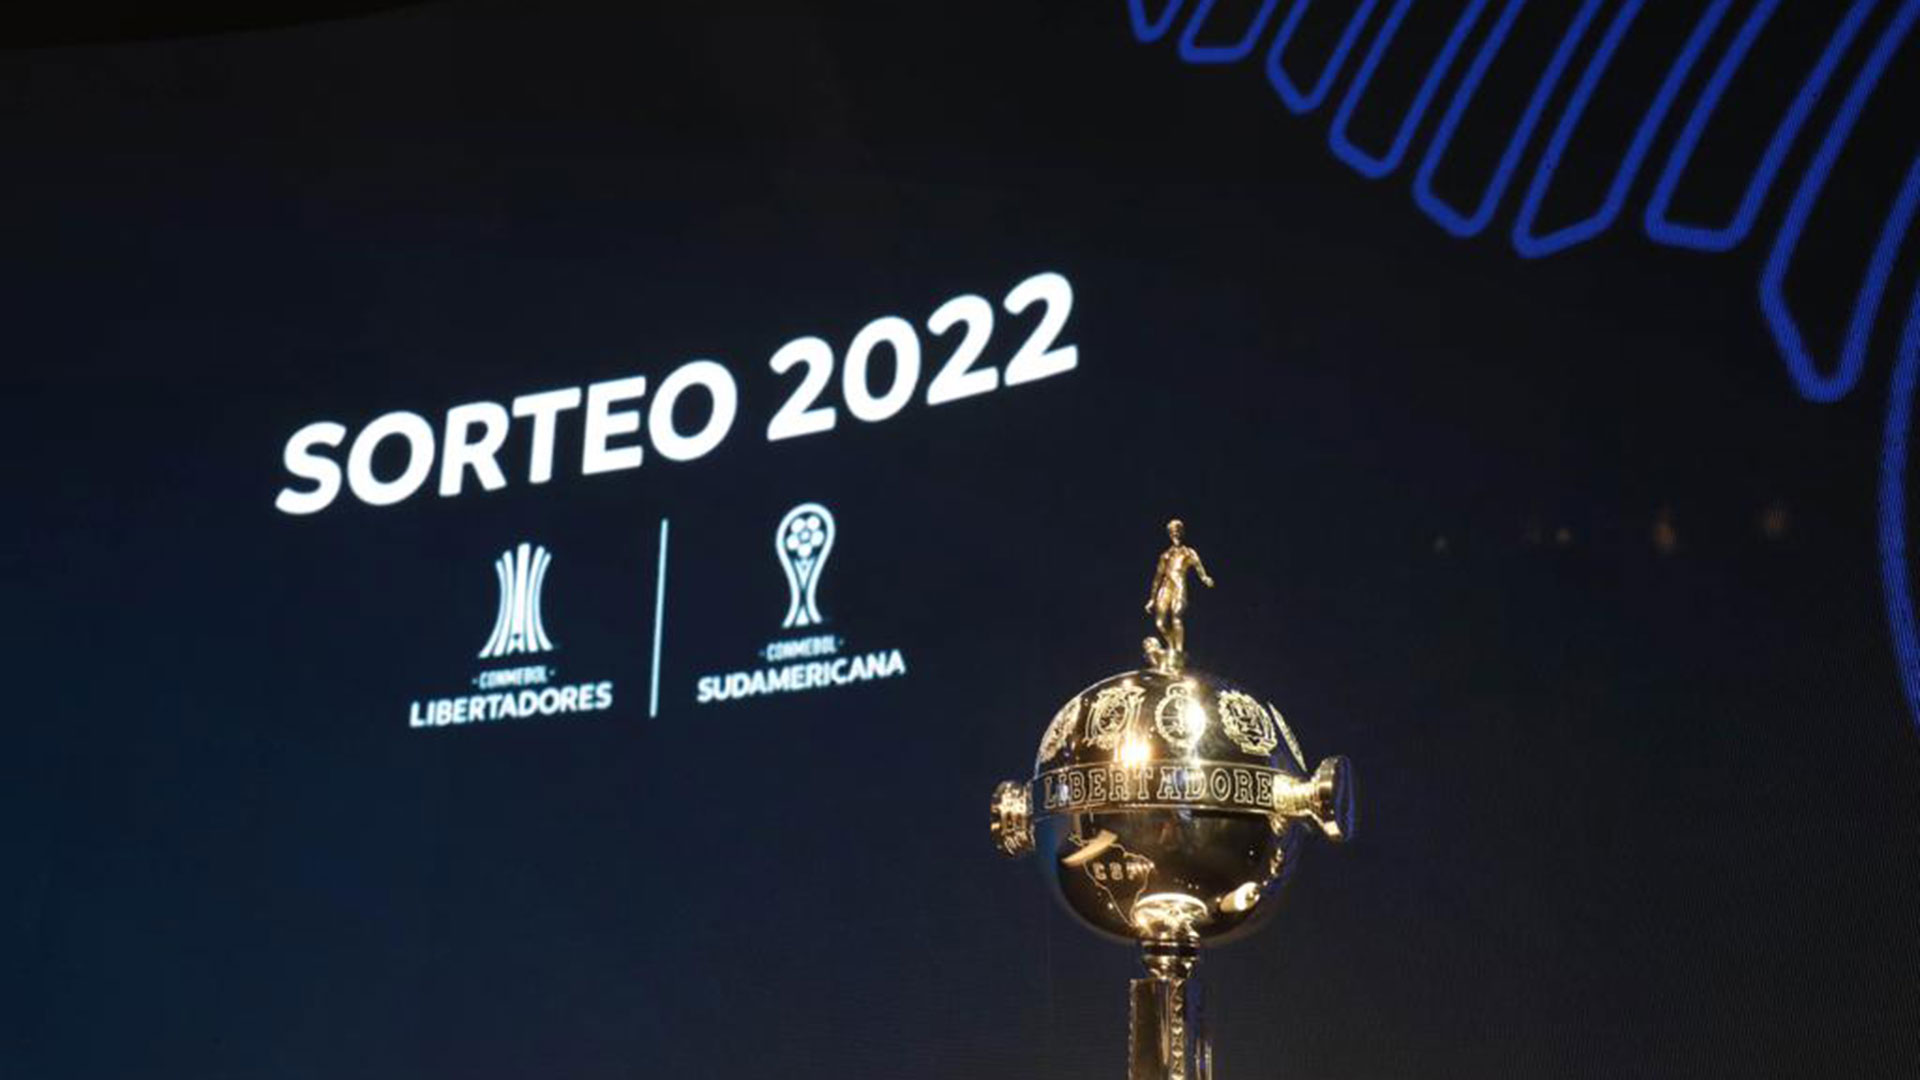 CONMEBOL Libertadores on X: 🤩🏆⚽ The #Libertadores Group Stage draw in  full! 🔜 Action starts on April 20th!  / X